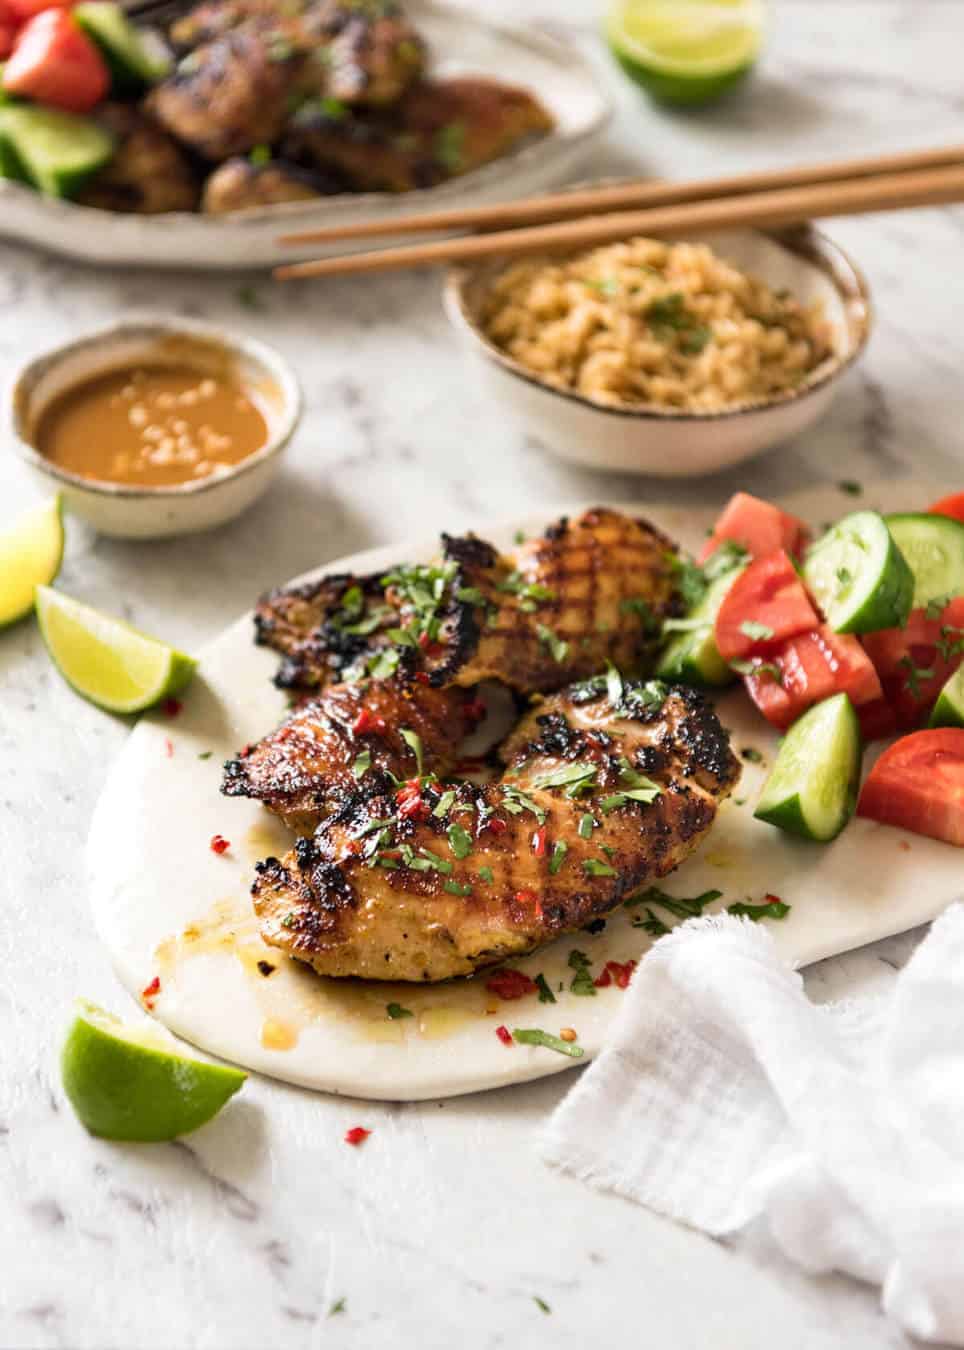 Thai Coconut Chicken - Chicken marinated in a sensational Thai coconut marinade. Great for BBQ, stove or roasting. www.recipetineats.com